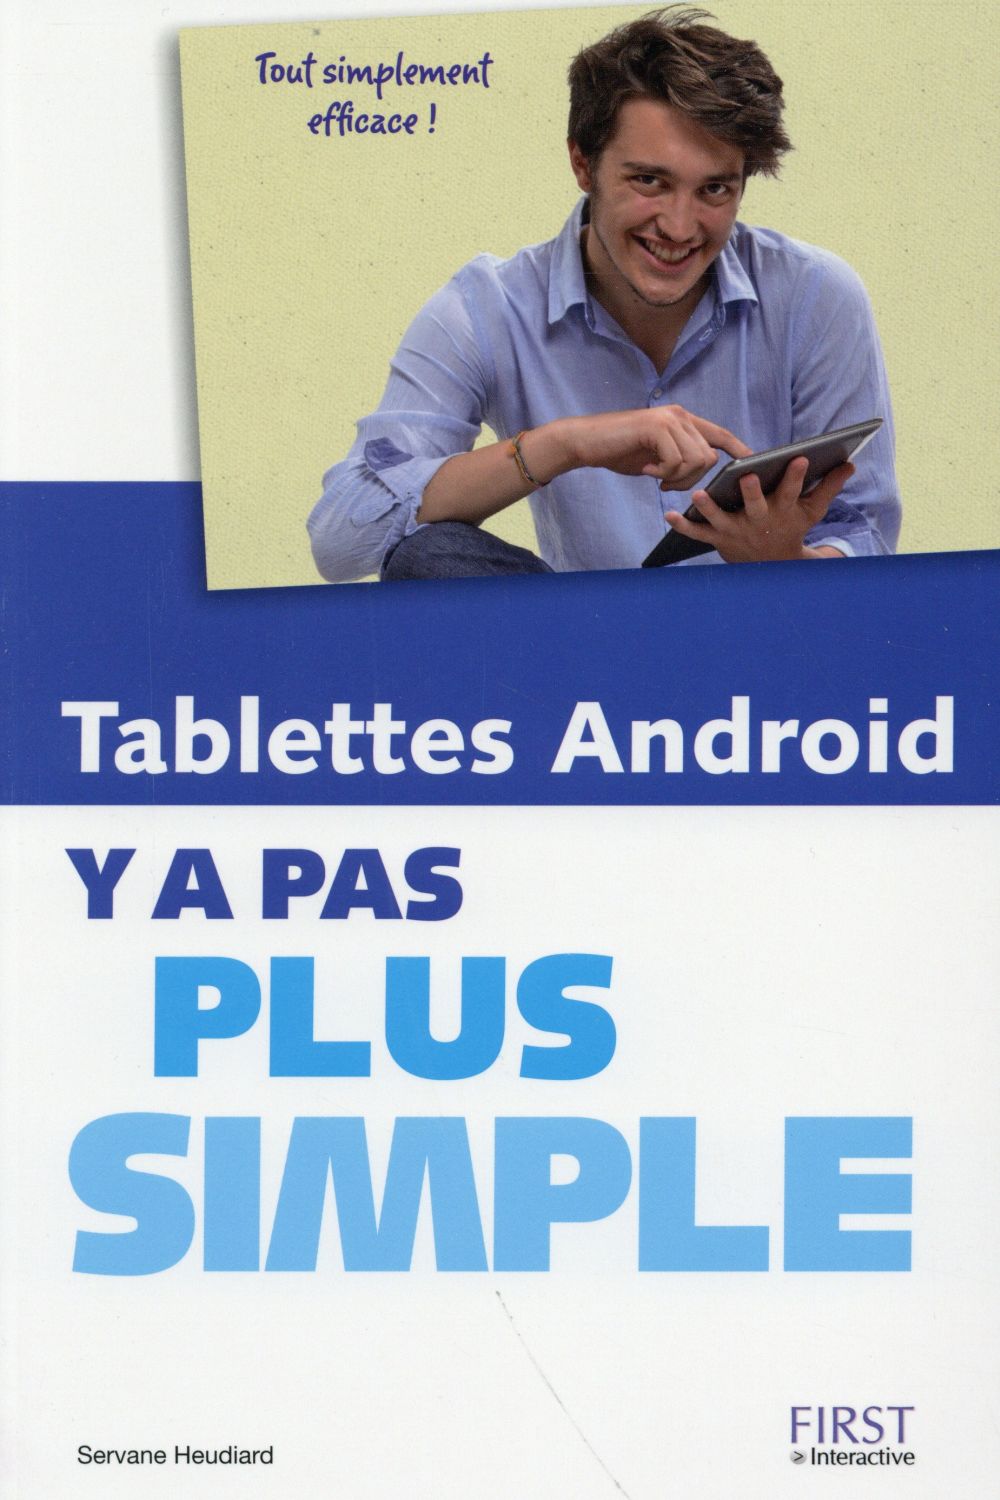 TABLETTES ANDROID Y A PAS PLUS SIMPLE